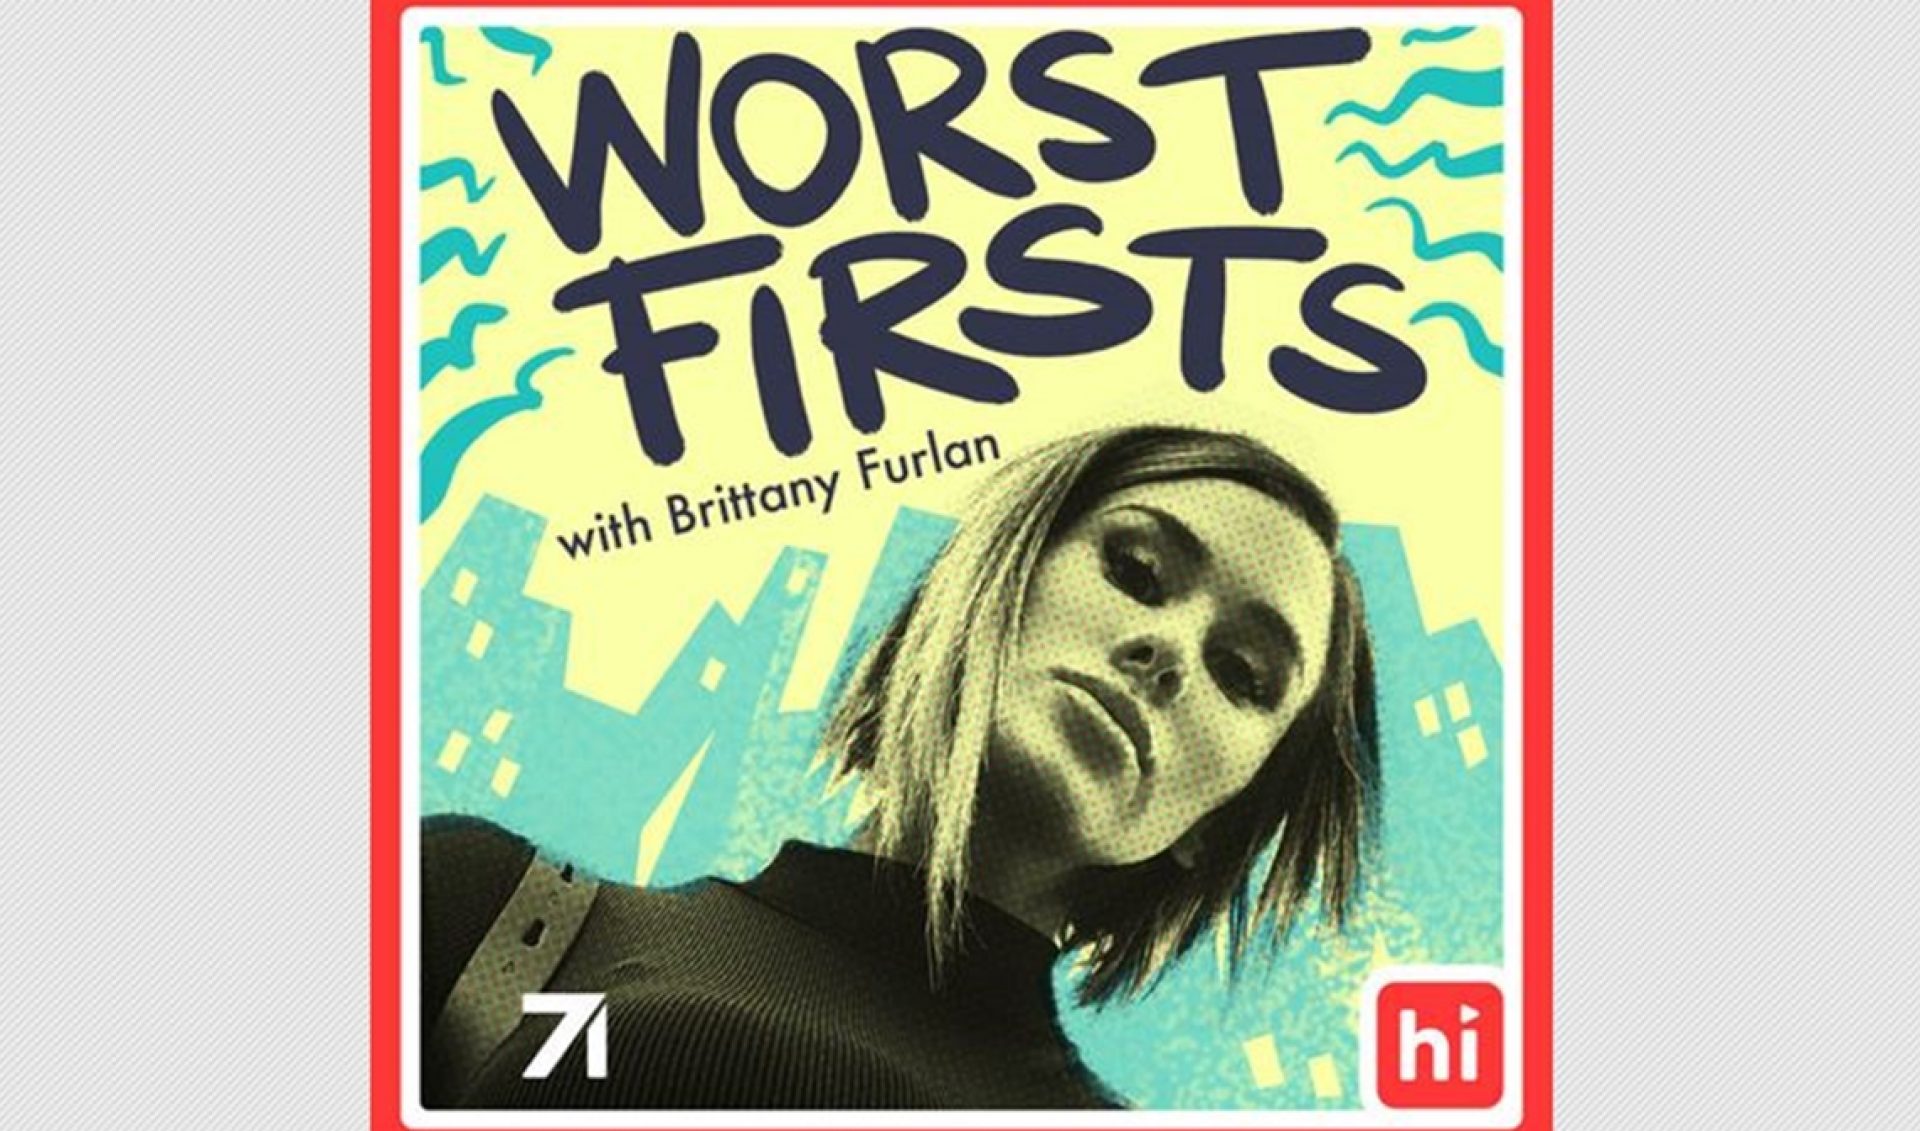 Brittany Furlan Launches ‘Worst Firsts’ Podcast With Studio71